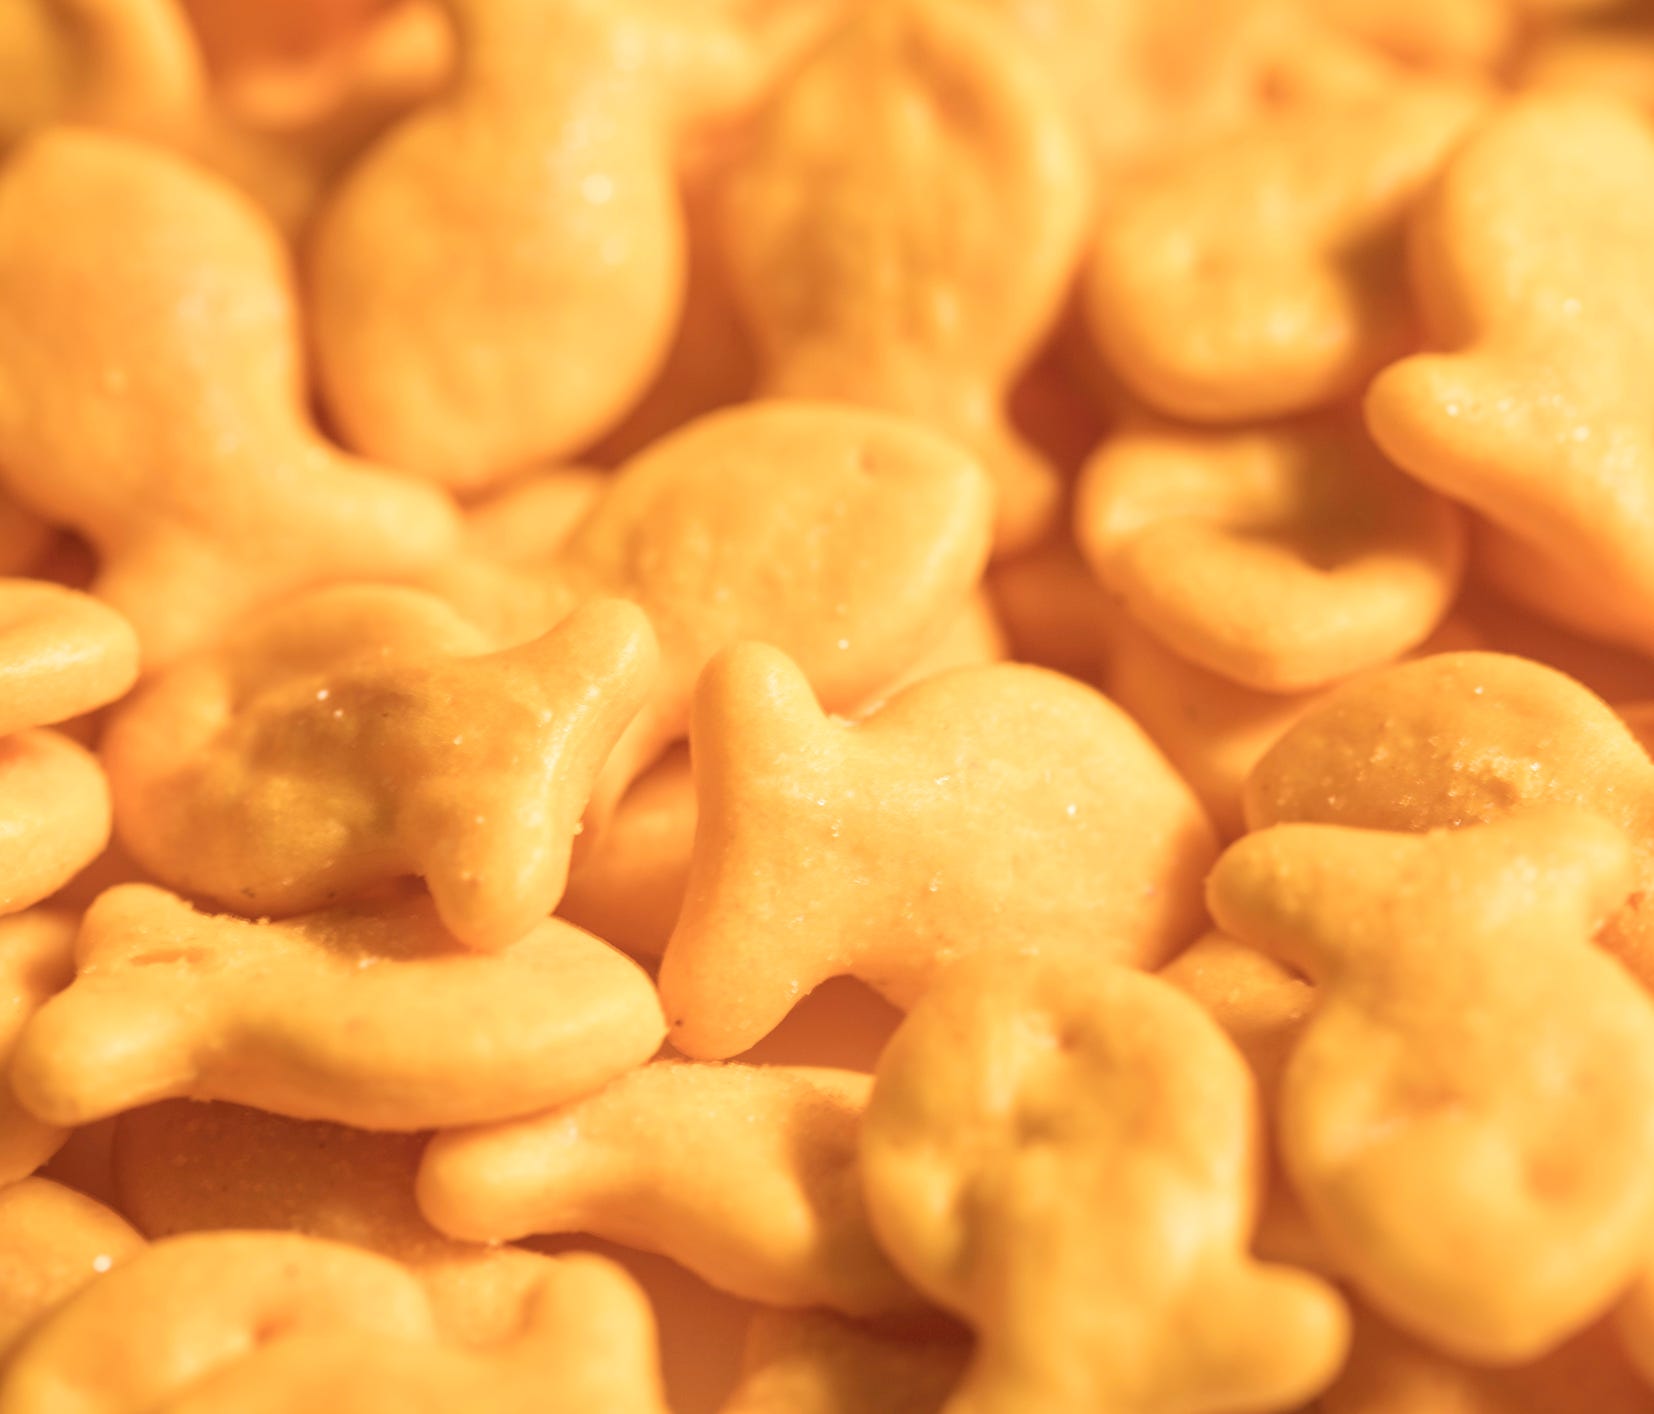 Pepperidge Farms is recalling four types of Goldfish crackers over salmonella concerns.